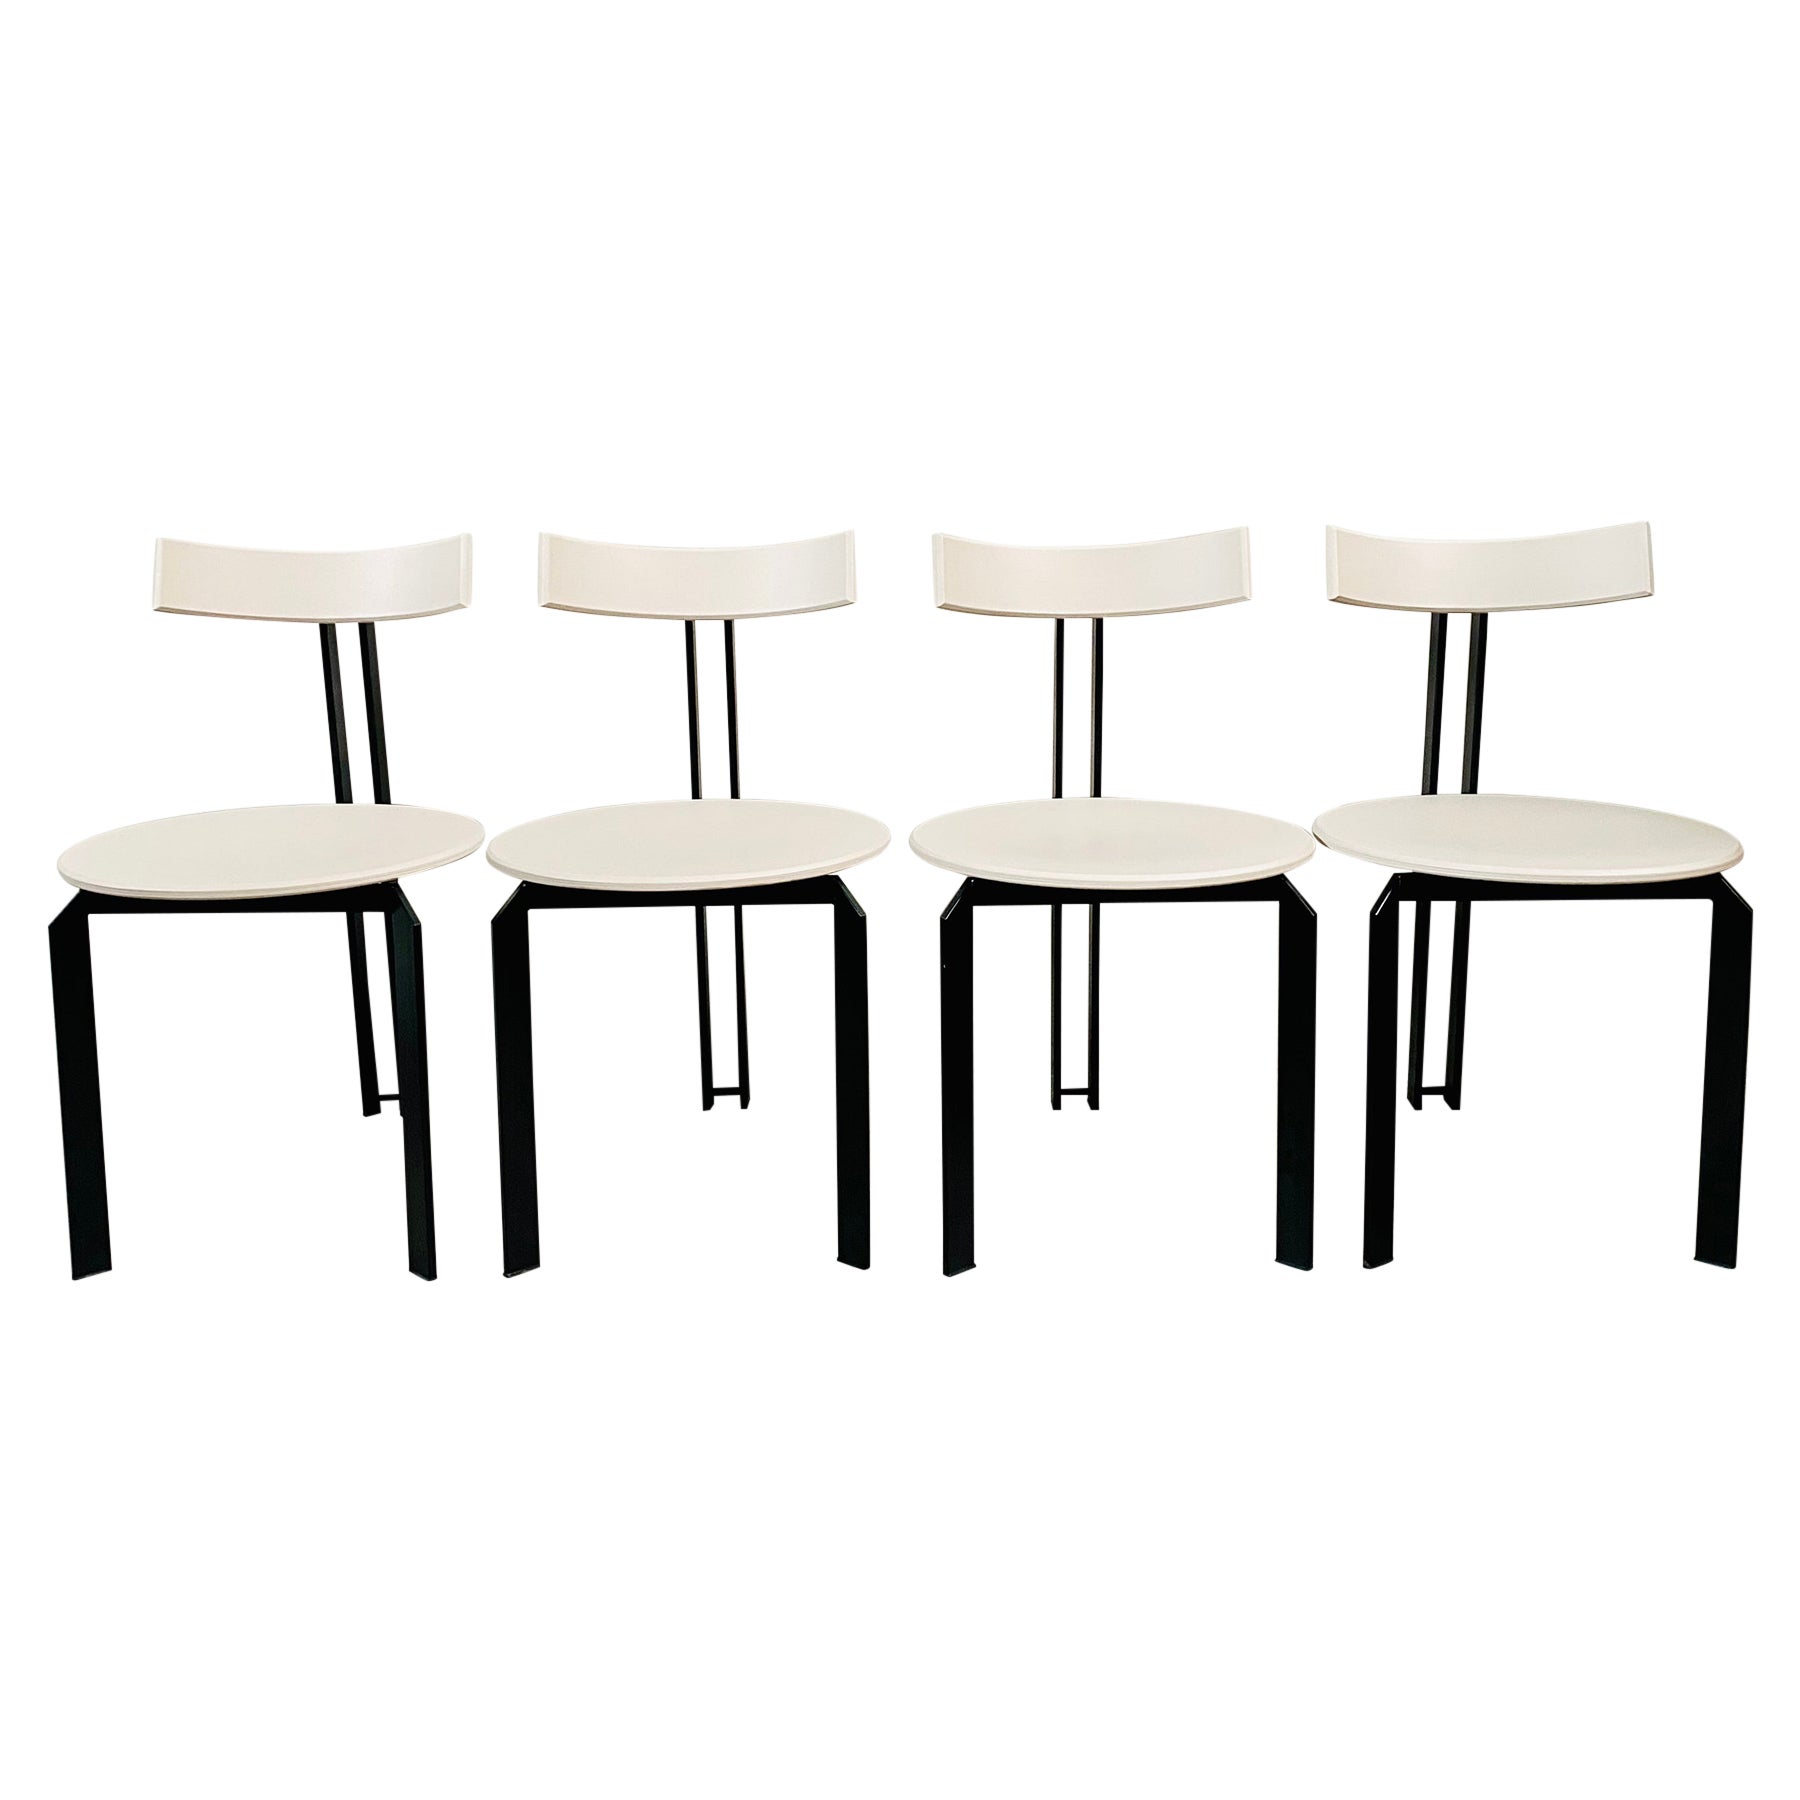 4 x Brutalist ZETA Dining Chairs by Martin Haksteen for Harvink, Netherlands 